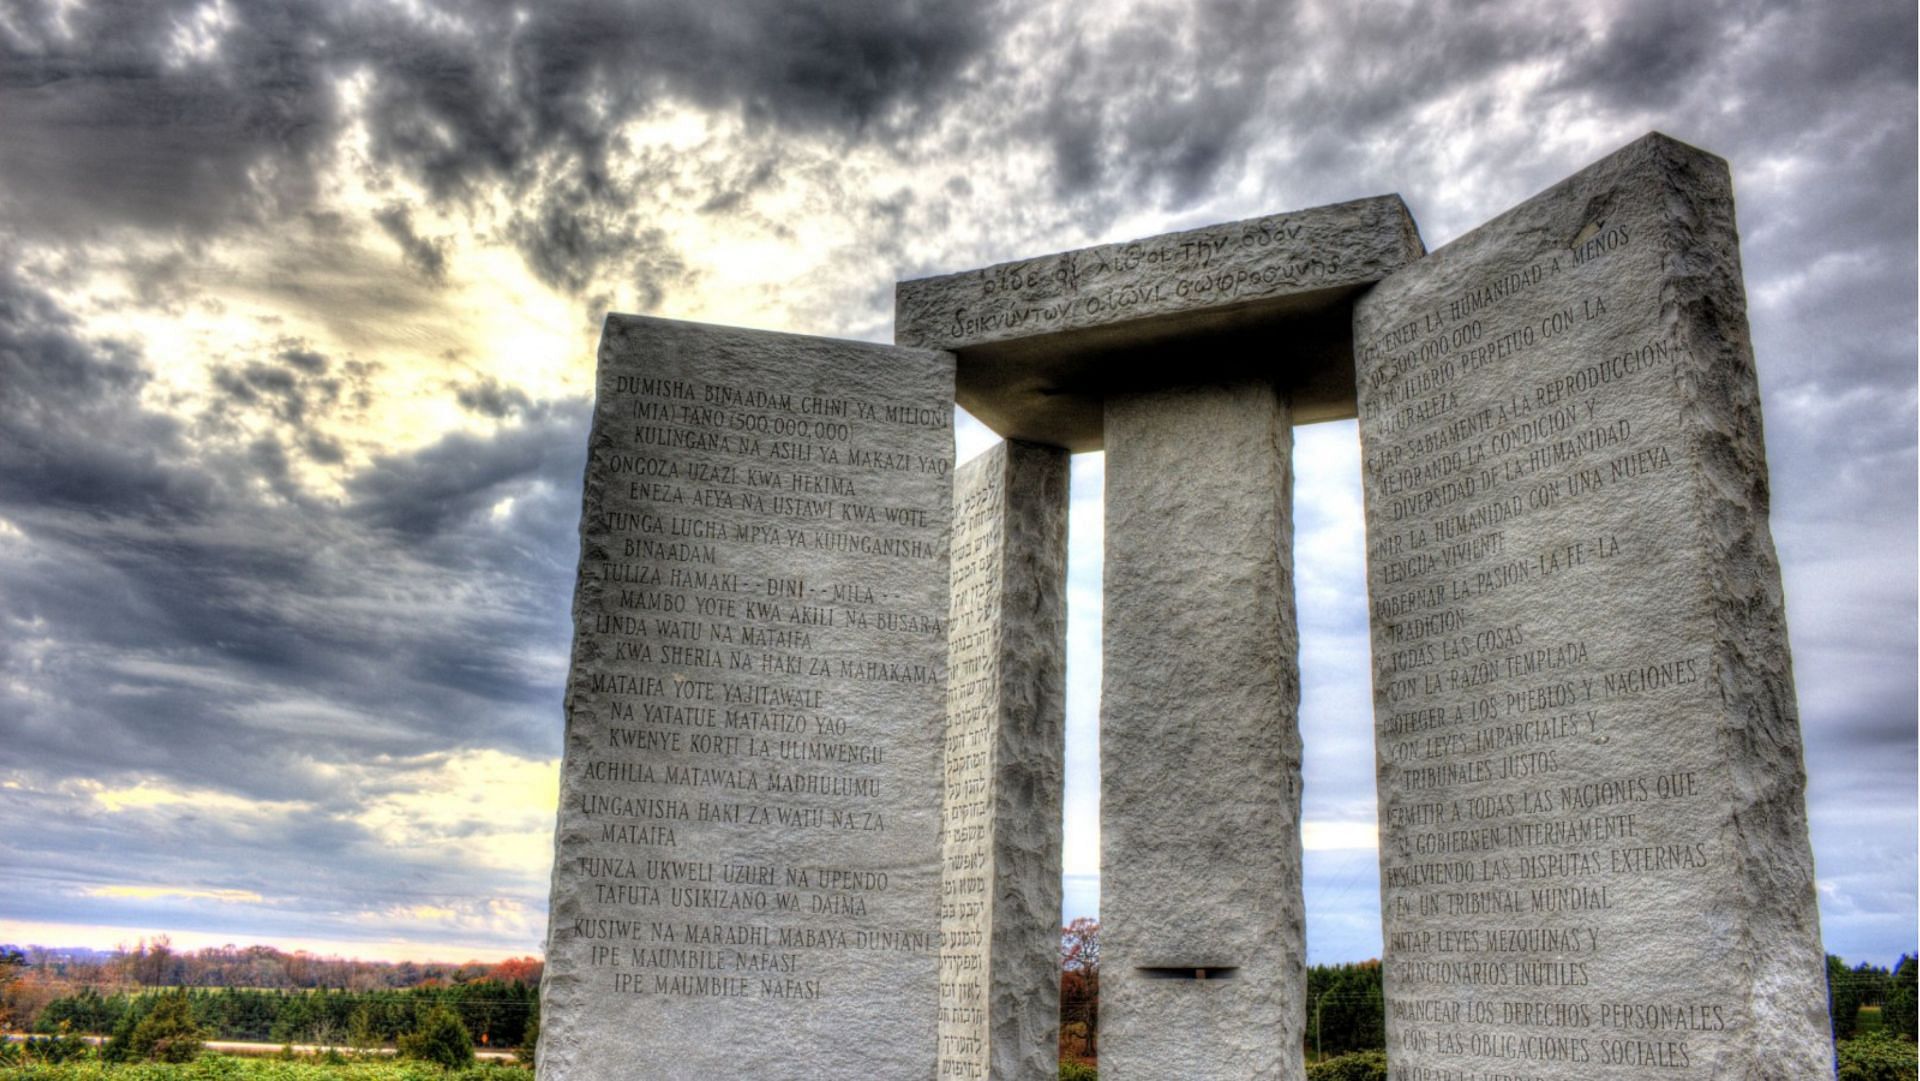 Georgia Guidestones have fueled several conspiracy theories about a &quot;new world order,&quot; over the years. (Image via Jon Thompson/Getty Images)